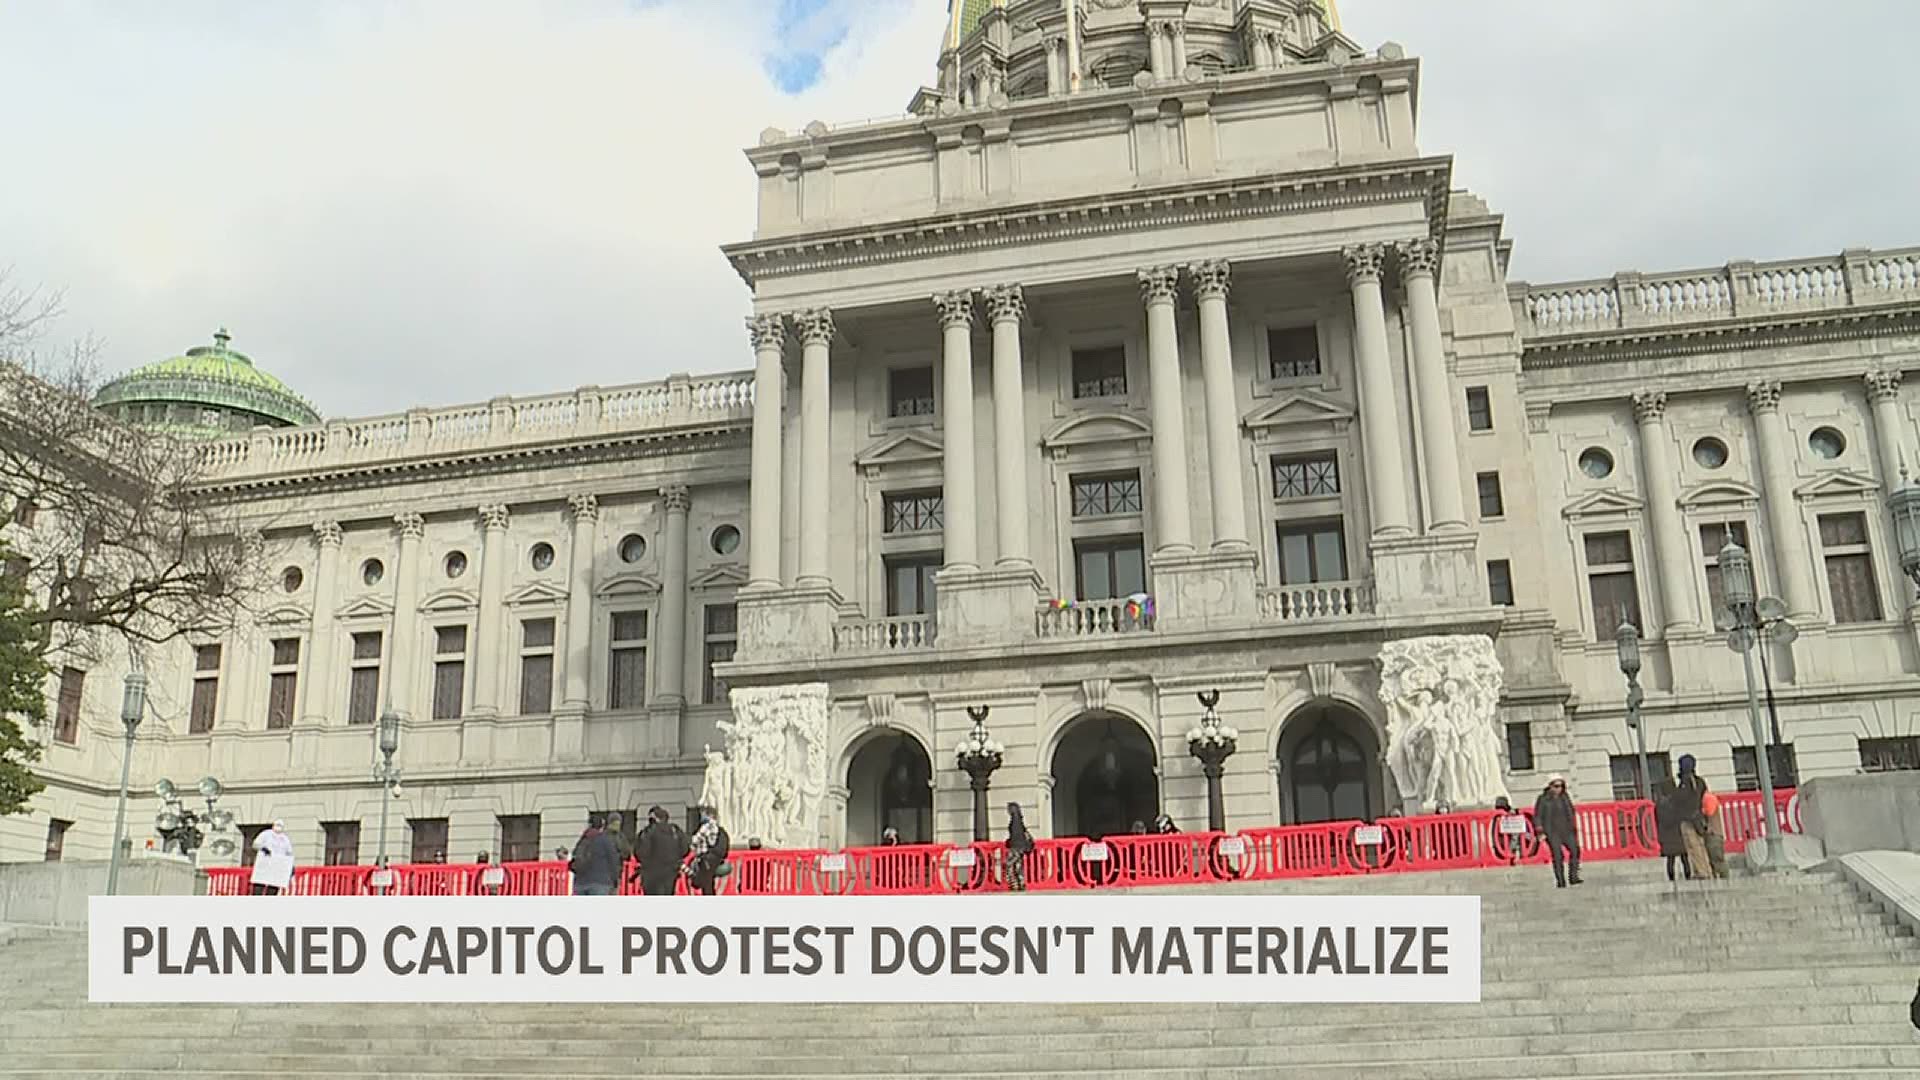 In Harrisburg, security personnel and journalists covering the expected protests far outnumbered the few protesters who showed up outside the Capitol building.